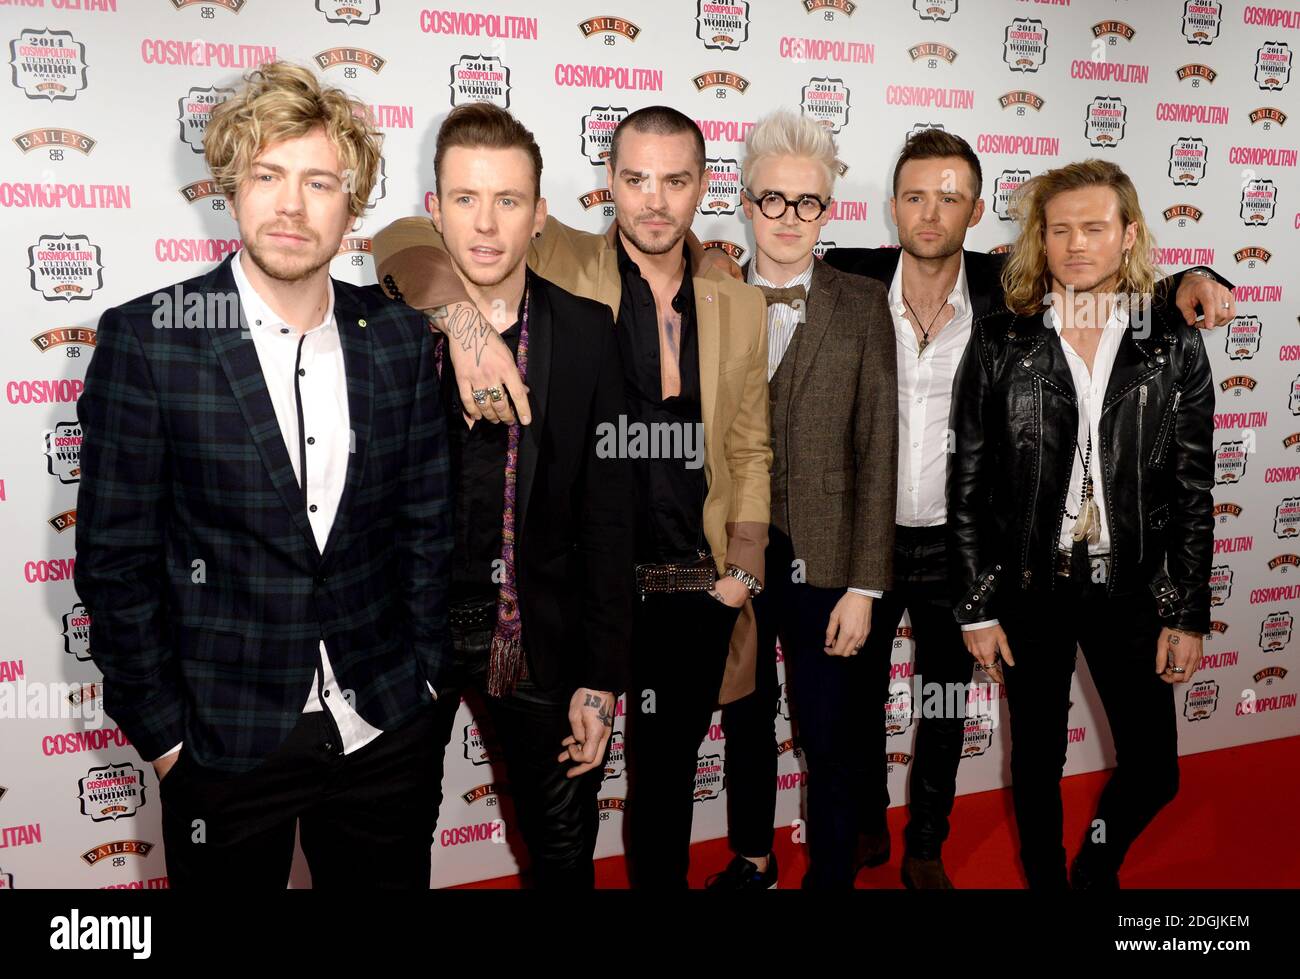 (left to right) James Bourne, Danny Jones, Matt Willis, Tom Fletcher, Harry Judd and Dougie Poynter of McBusted arriving at The Cosmopolitan Ultimate Women of the Year Awards, at the Victoria & Albert Museum, London Stock Photo